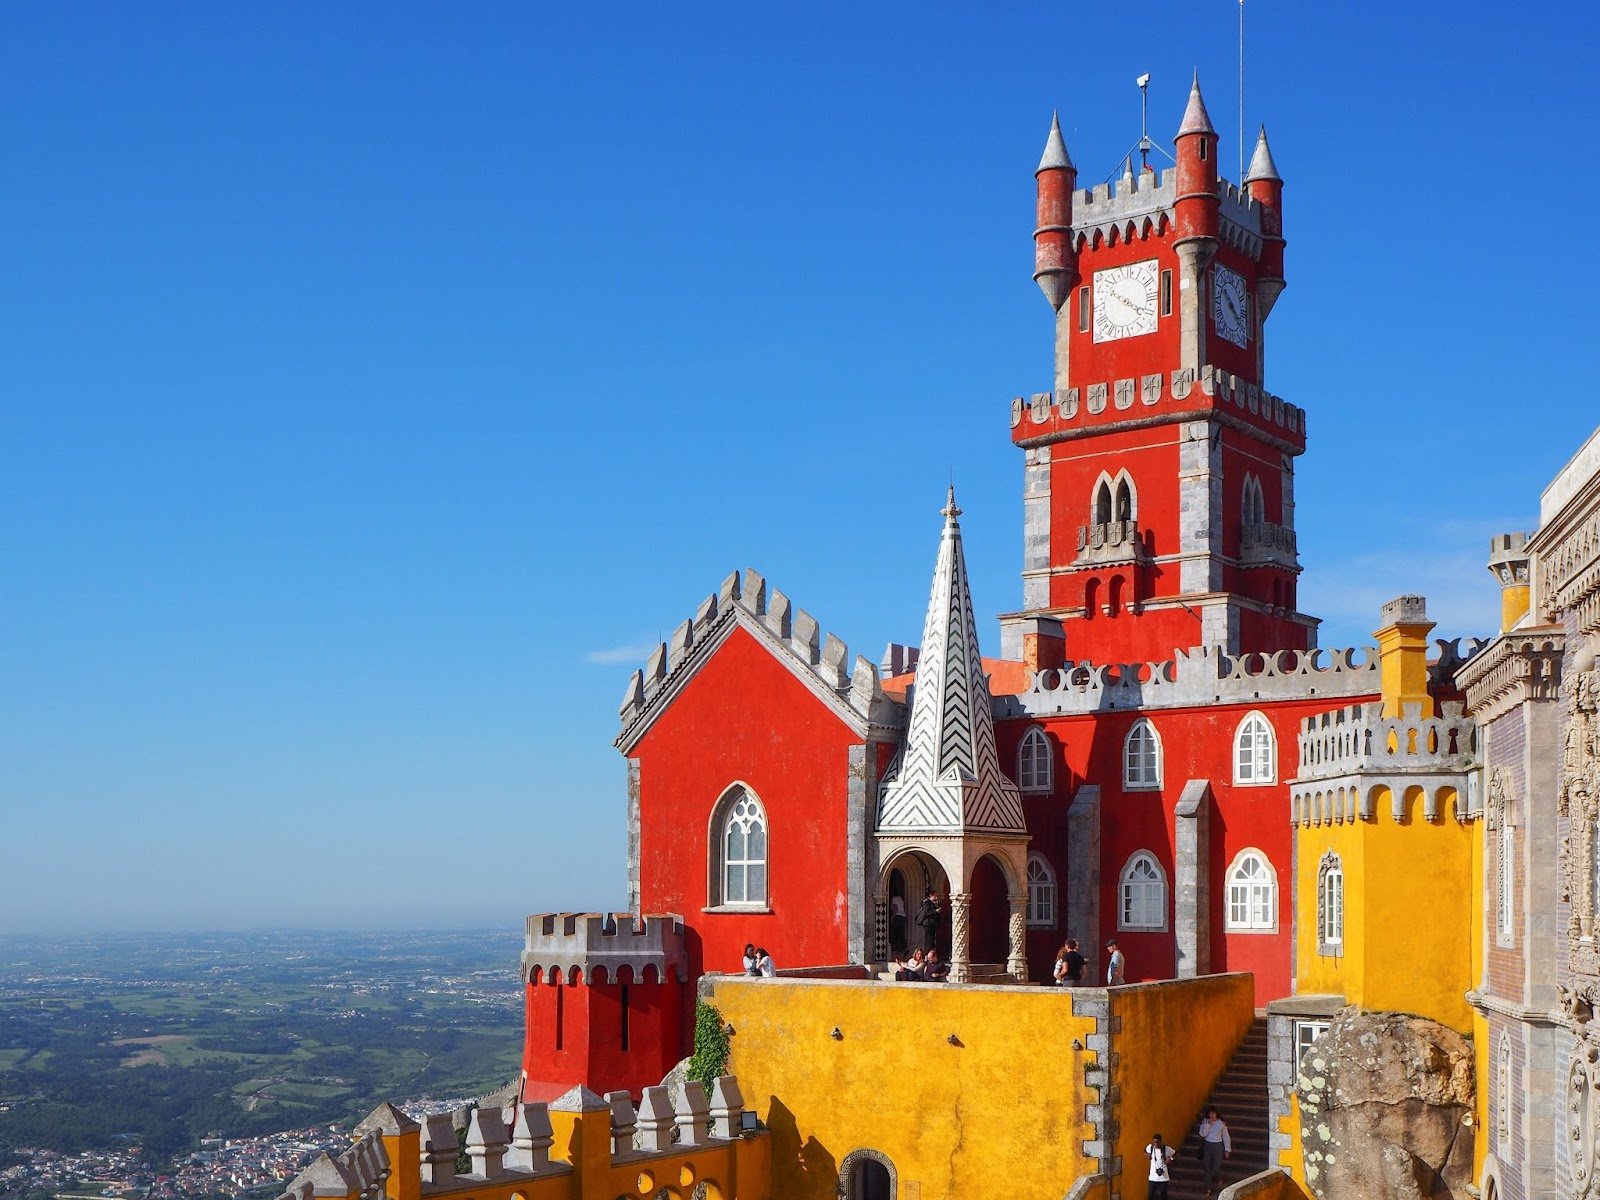 Take a Sintra Day Trip from Lisbon to See the Fairytale Town